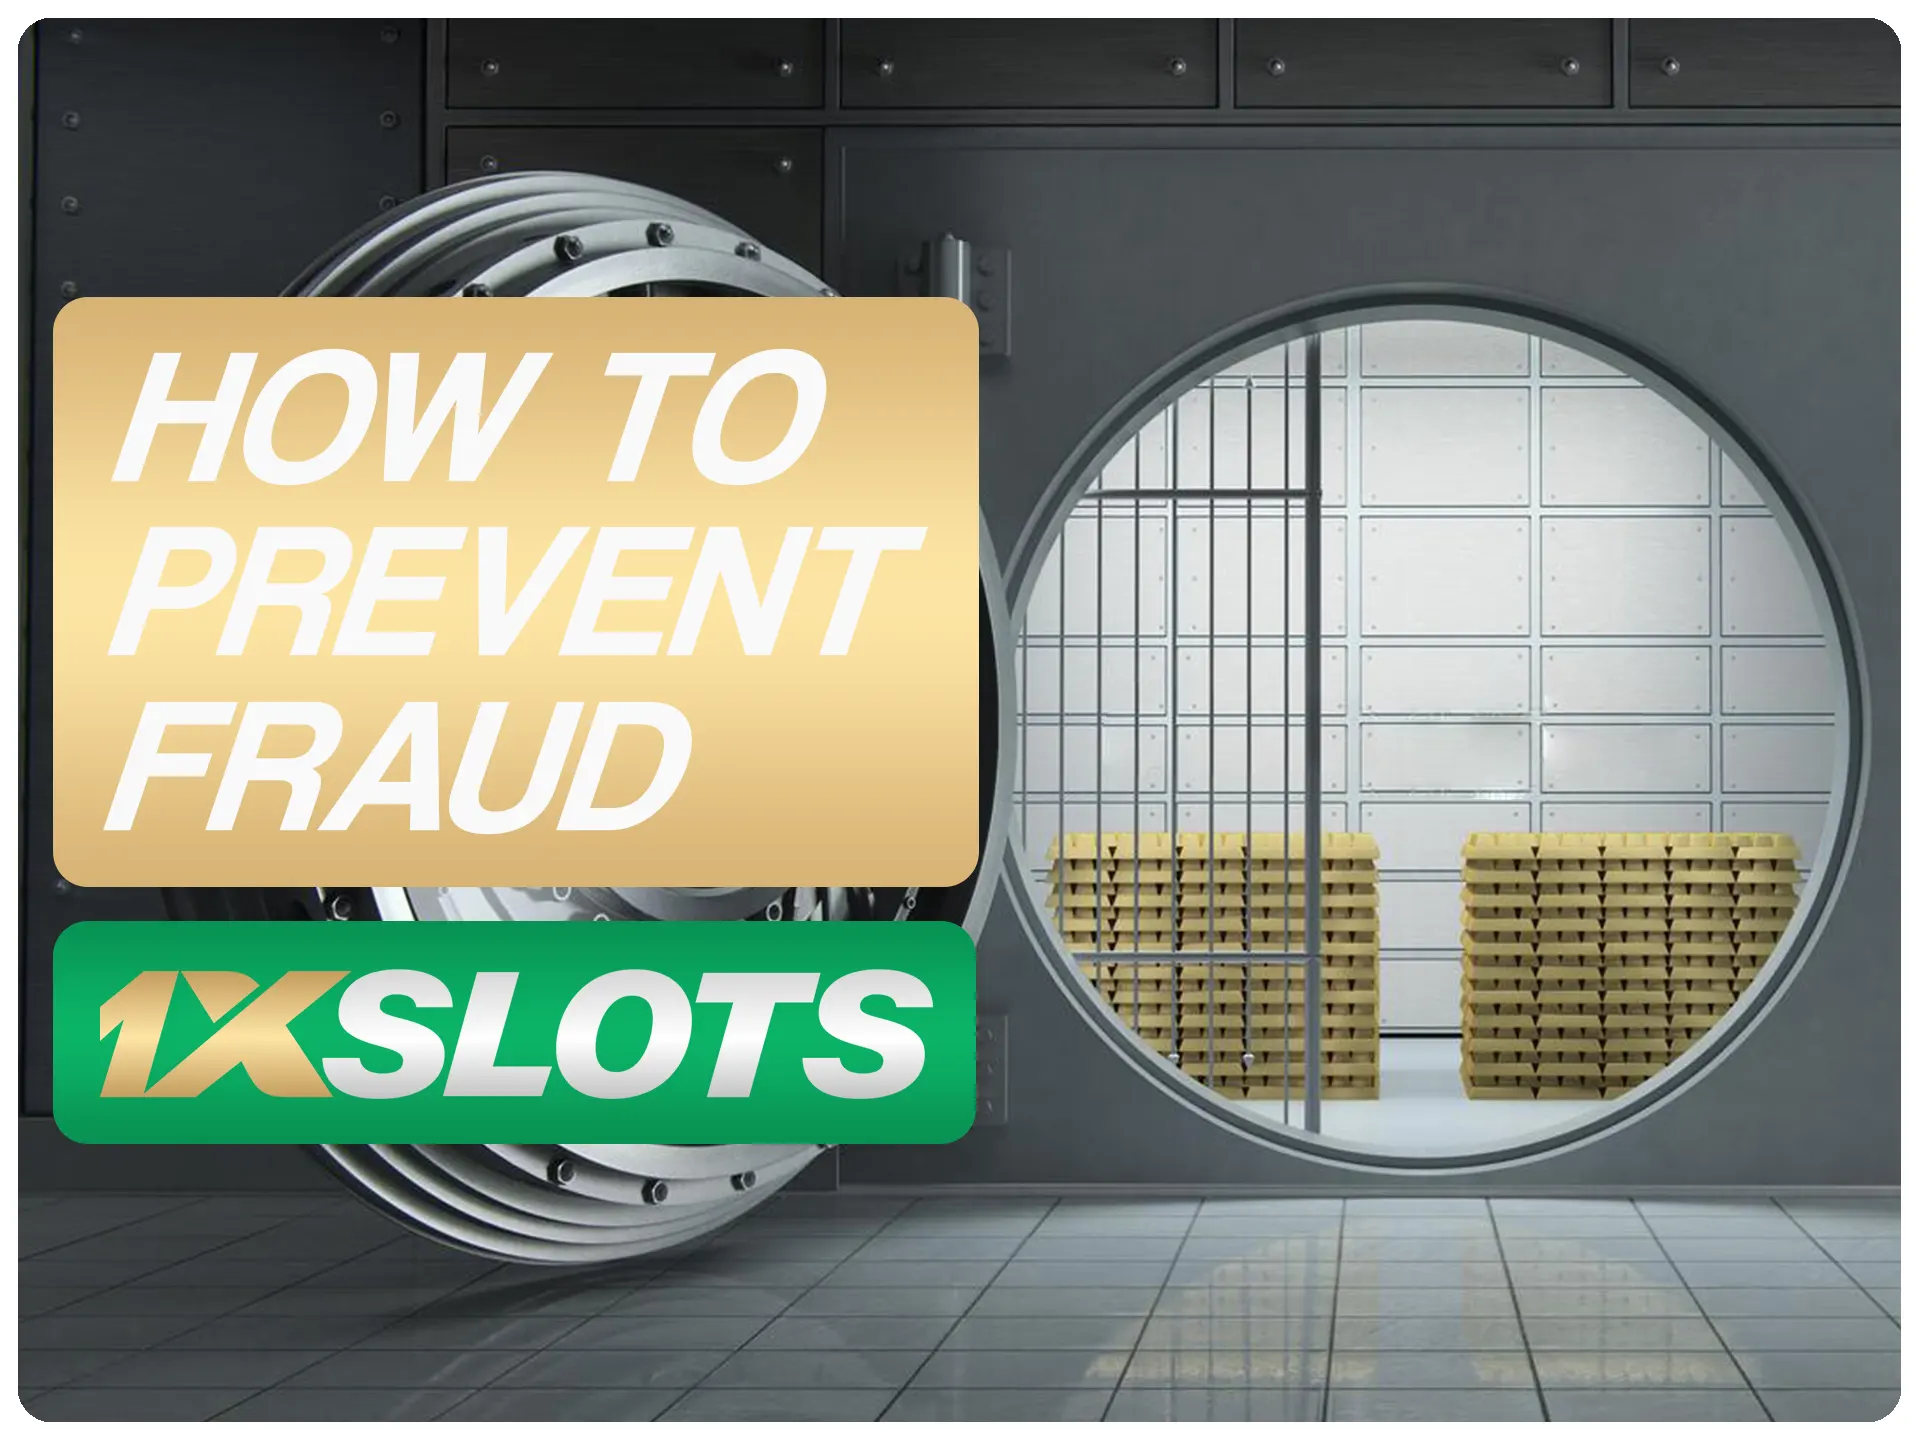 Prevent your 1xSlots funds get stolen with simple tips.